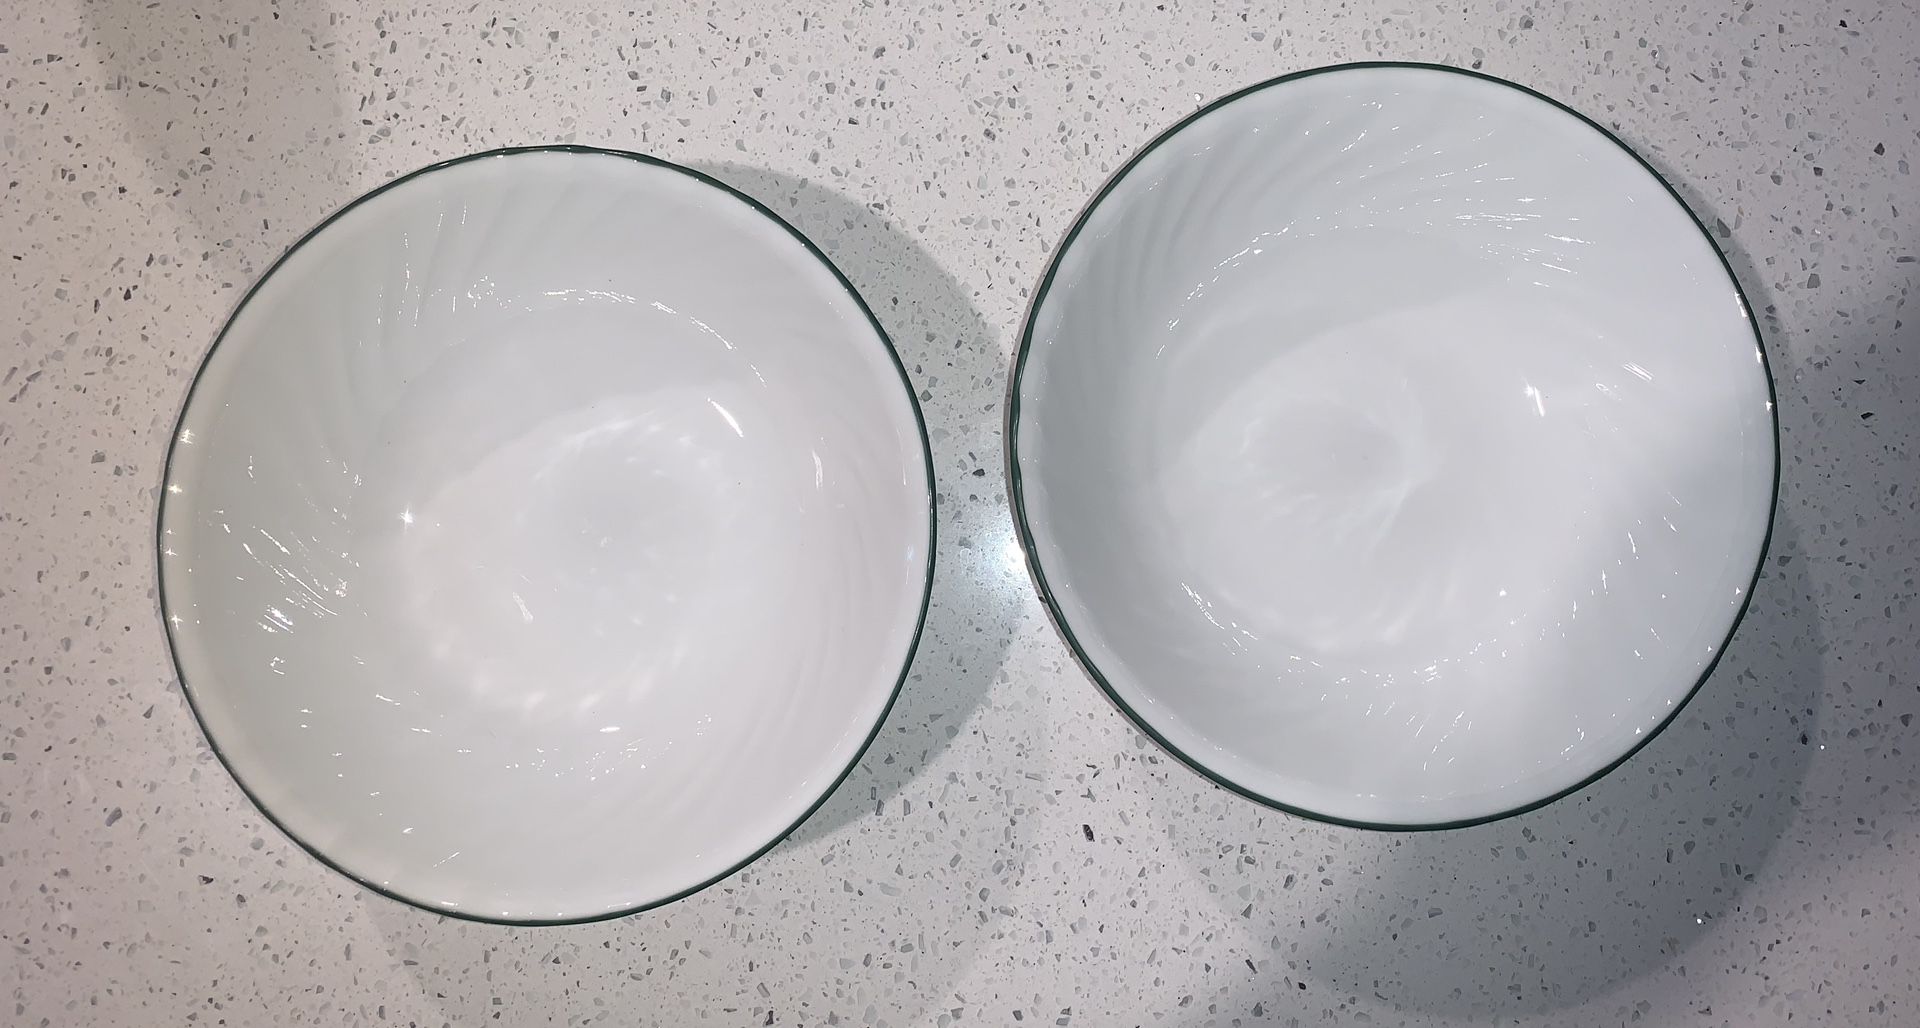 2 bowls of Corelle Dinnerware by Corning